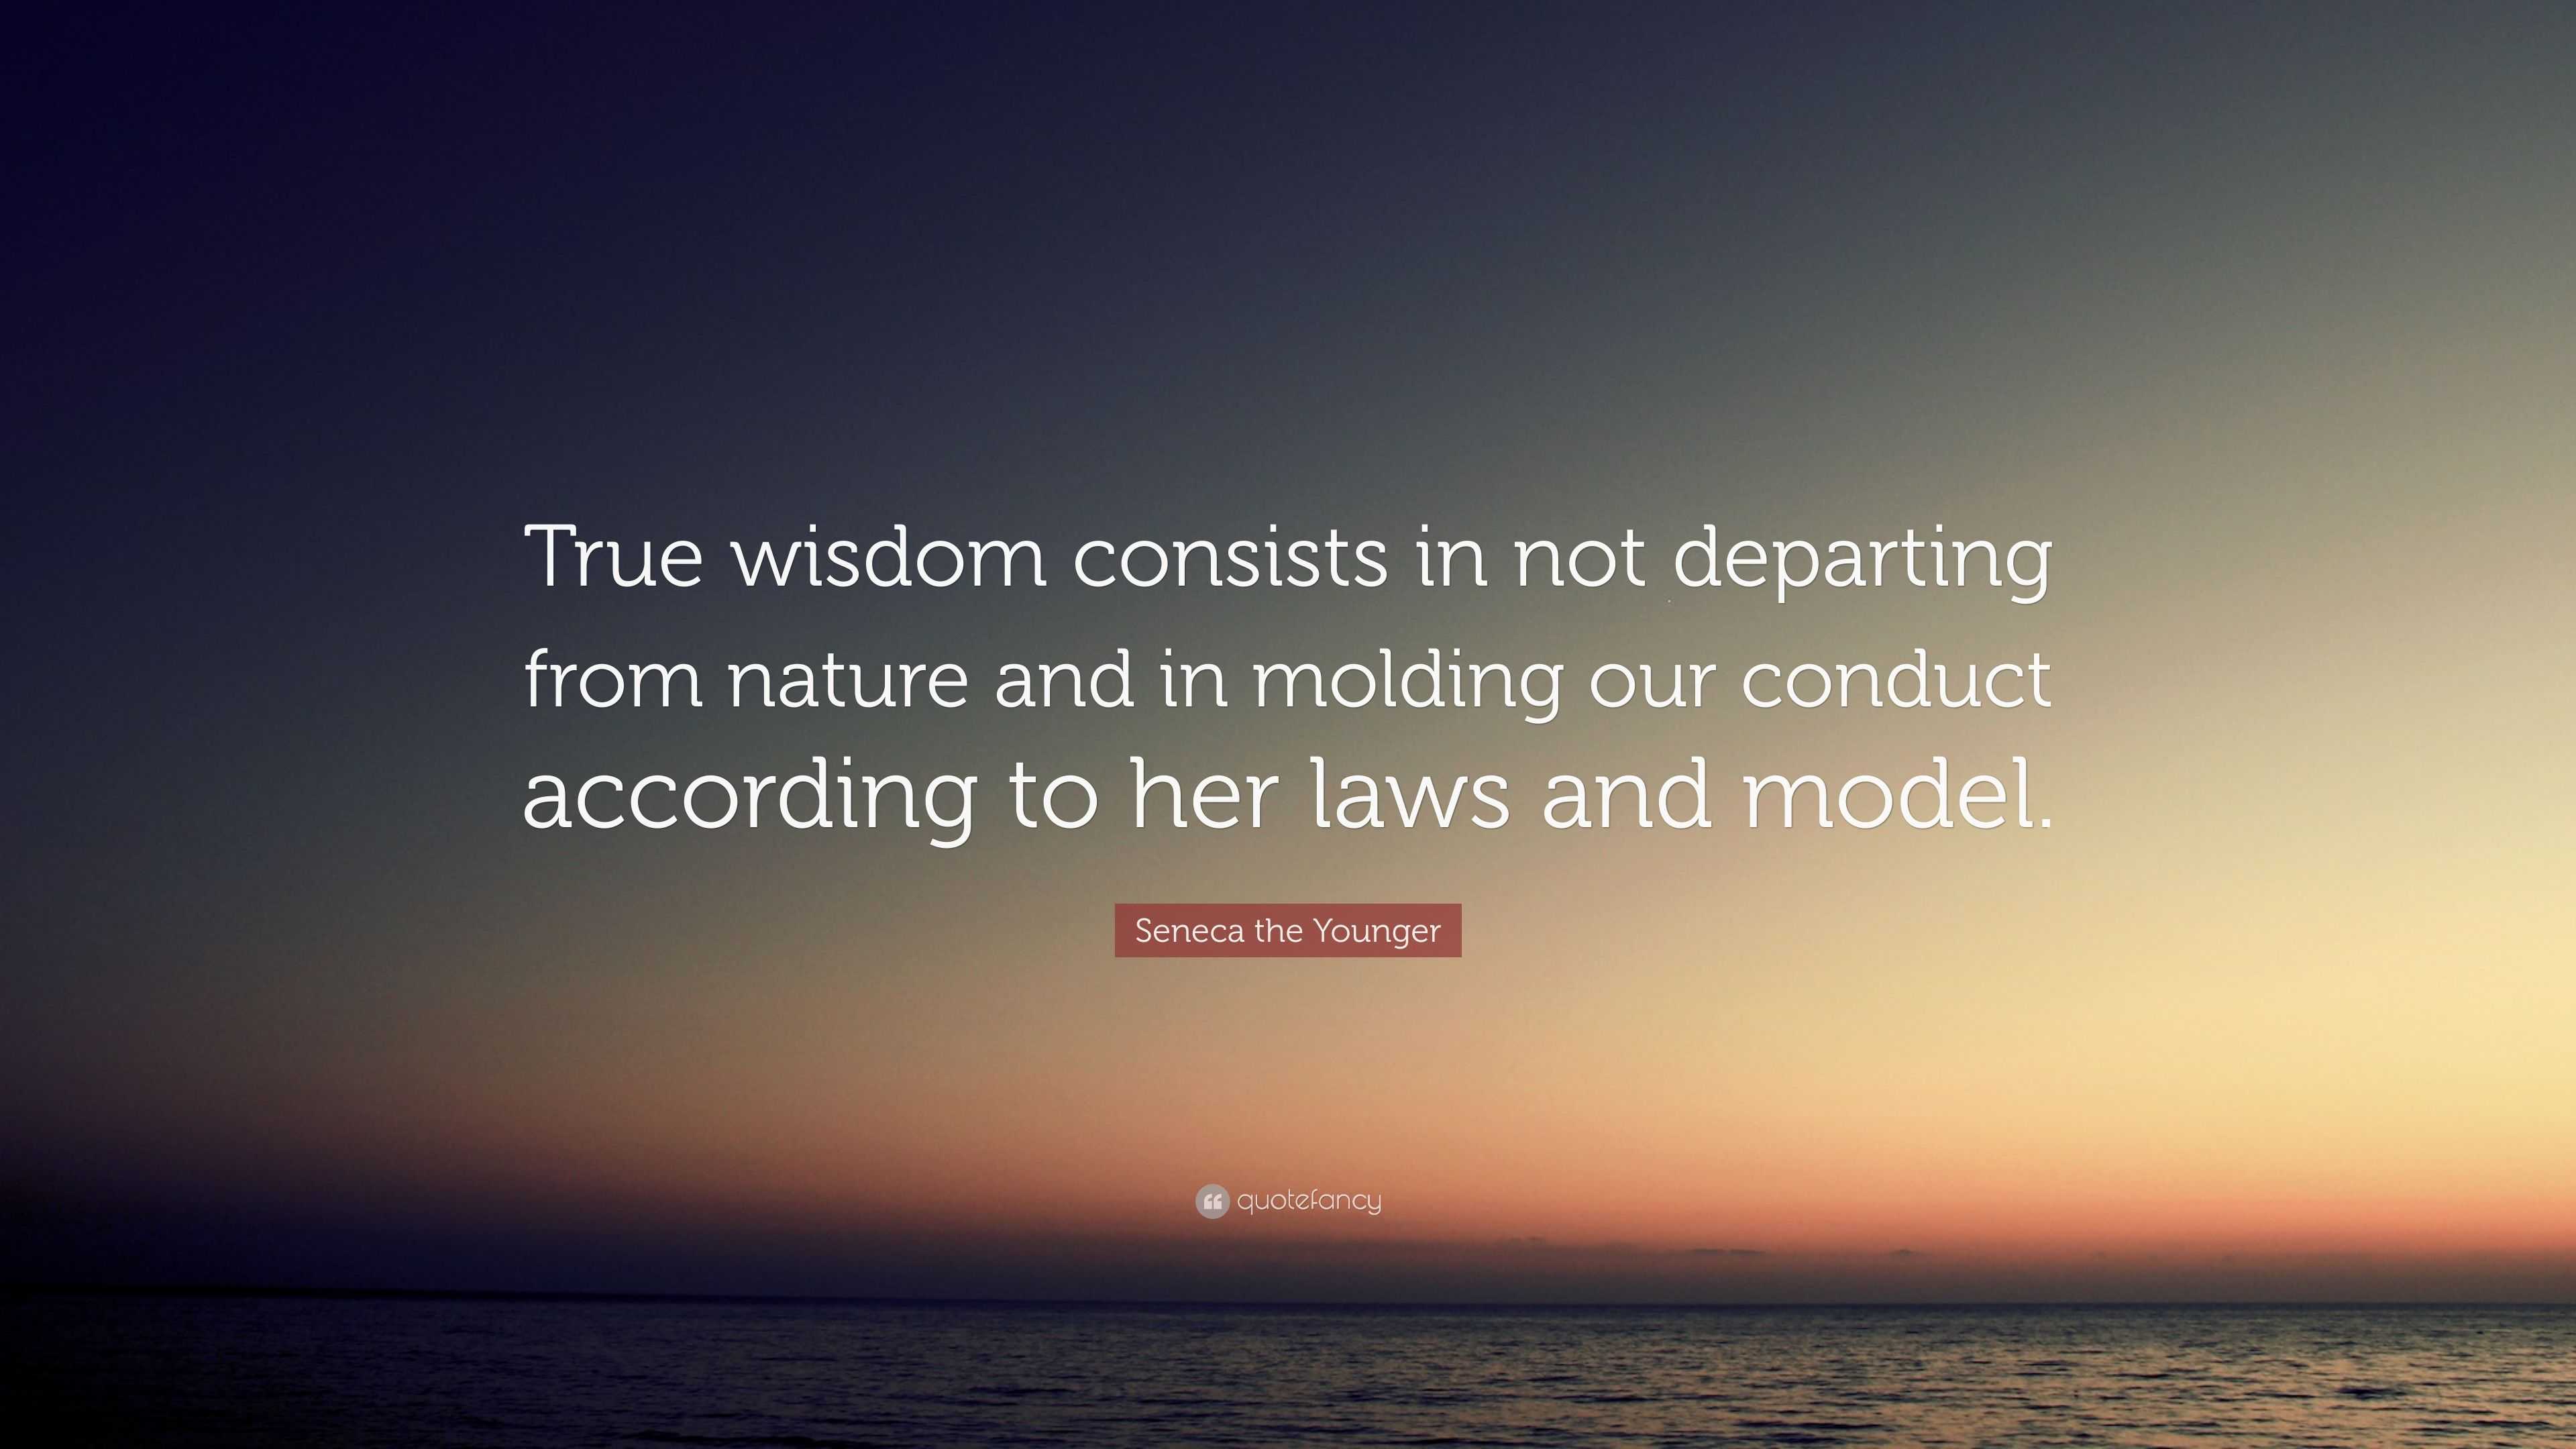 Seneca the Younger Quote: "True wisdom consists in not ...